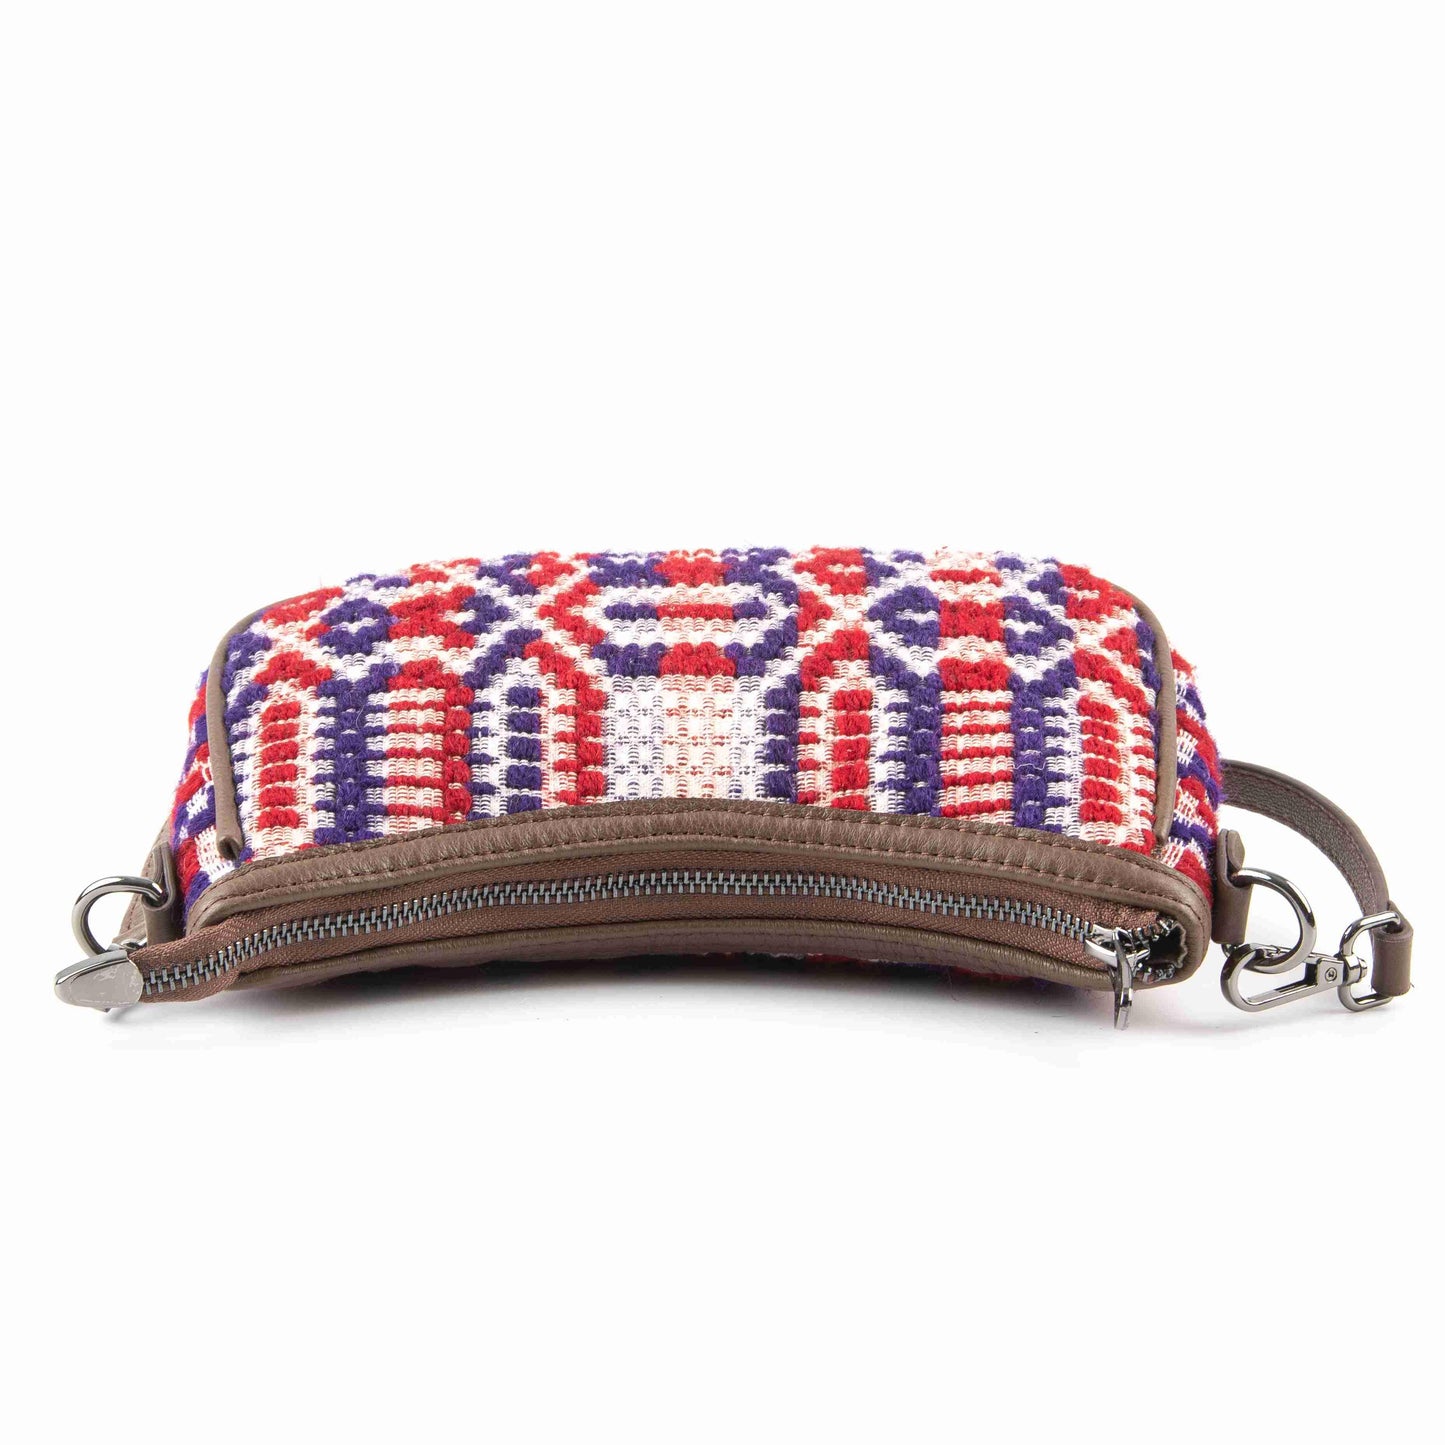 Women's Baguette Bag Crafted From Handmade Kilim and Real Leather